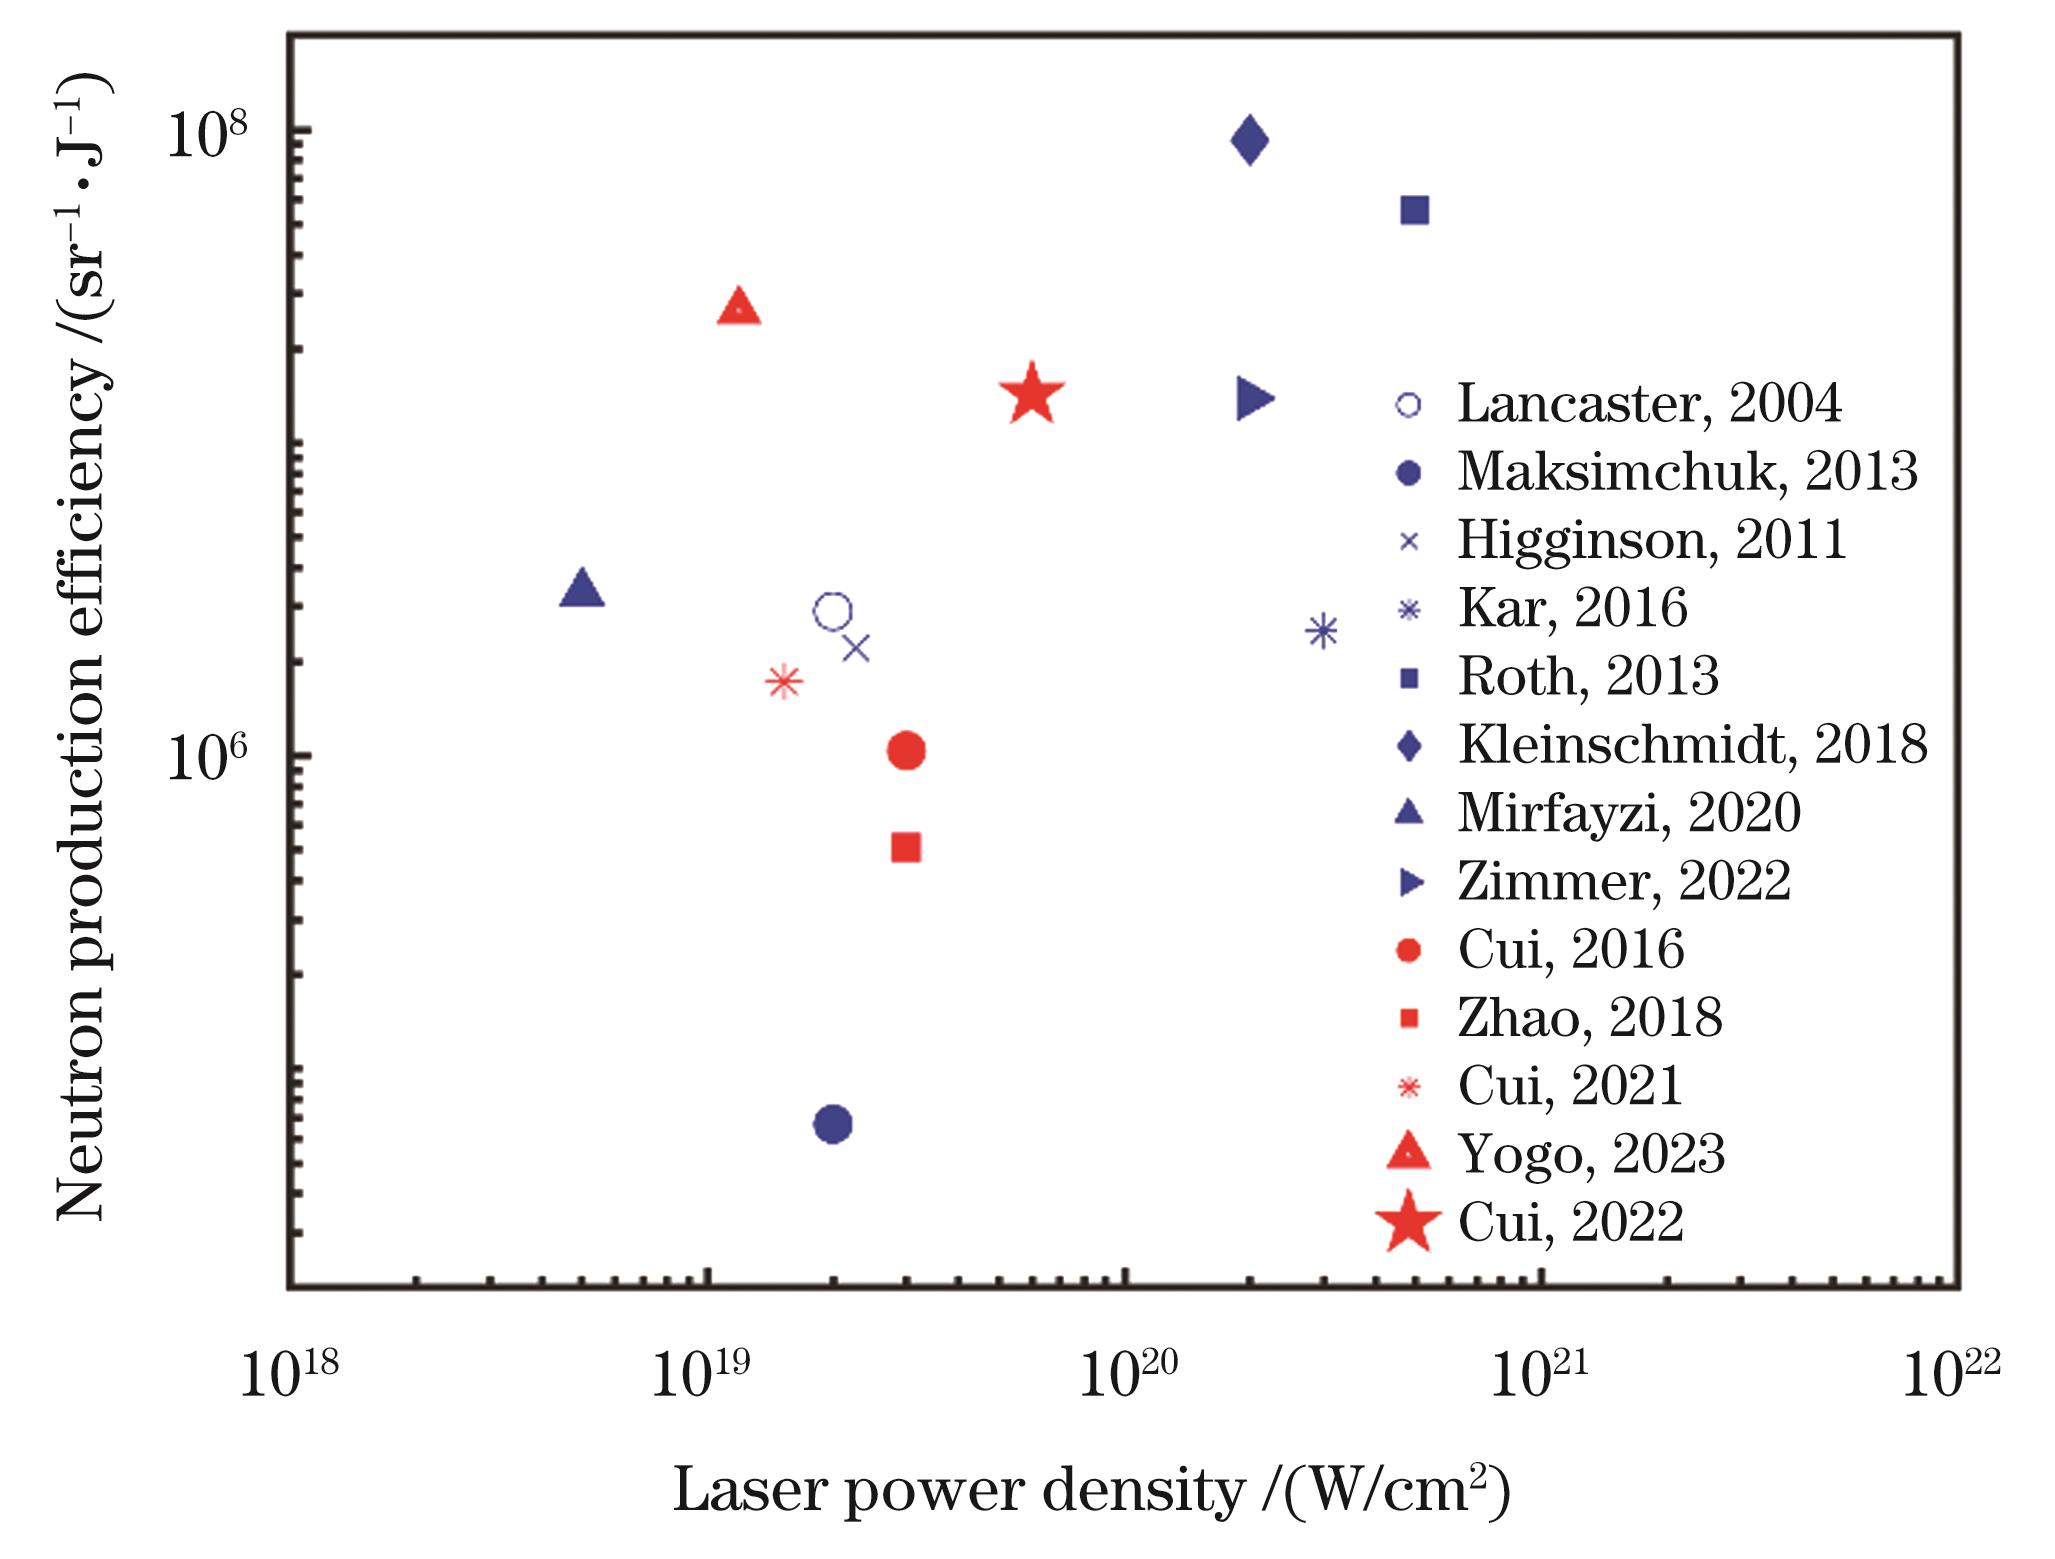 Experimental results of neutron sources under different laser power densities